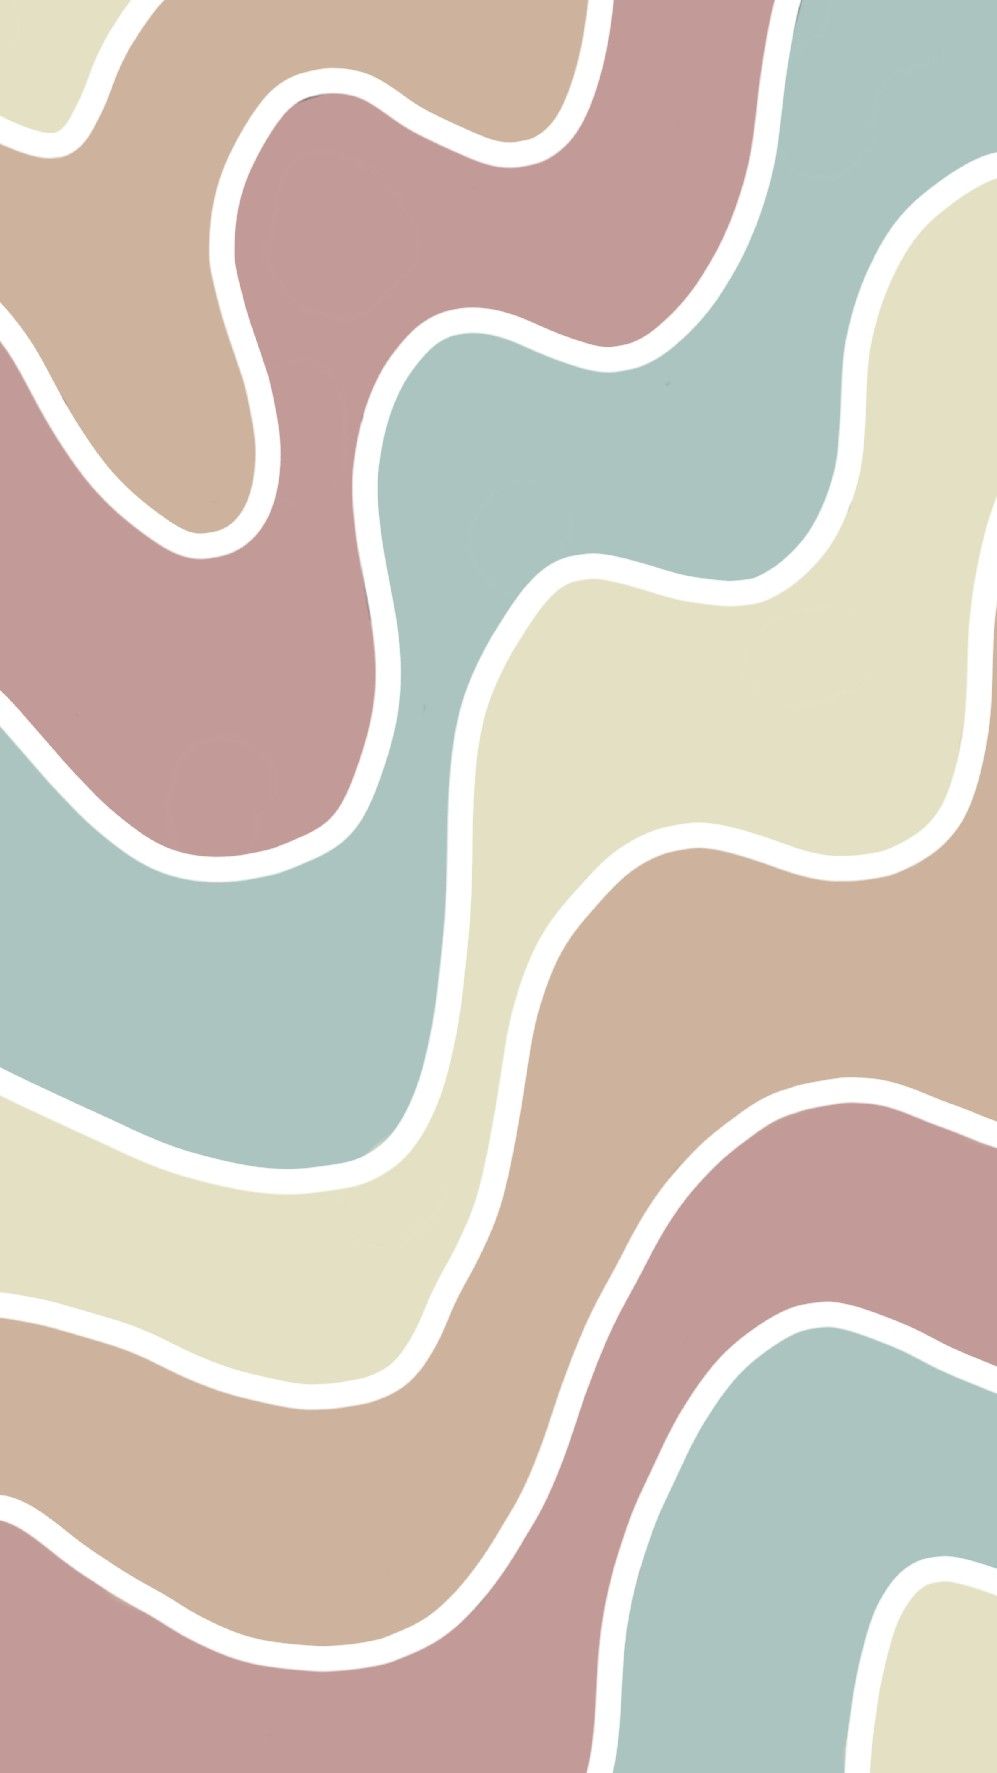 A wavy abstract pattern in muted colors - Colorful